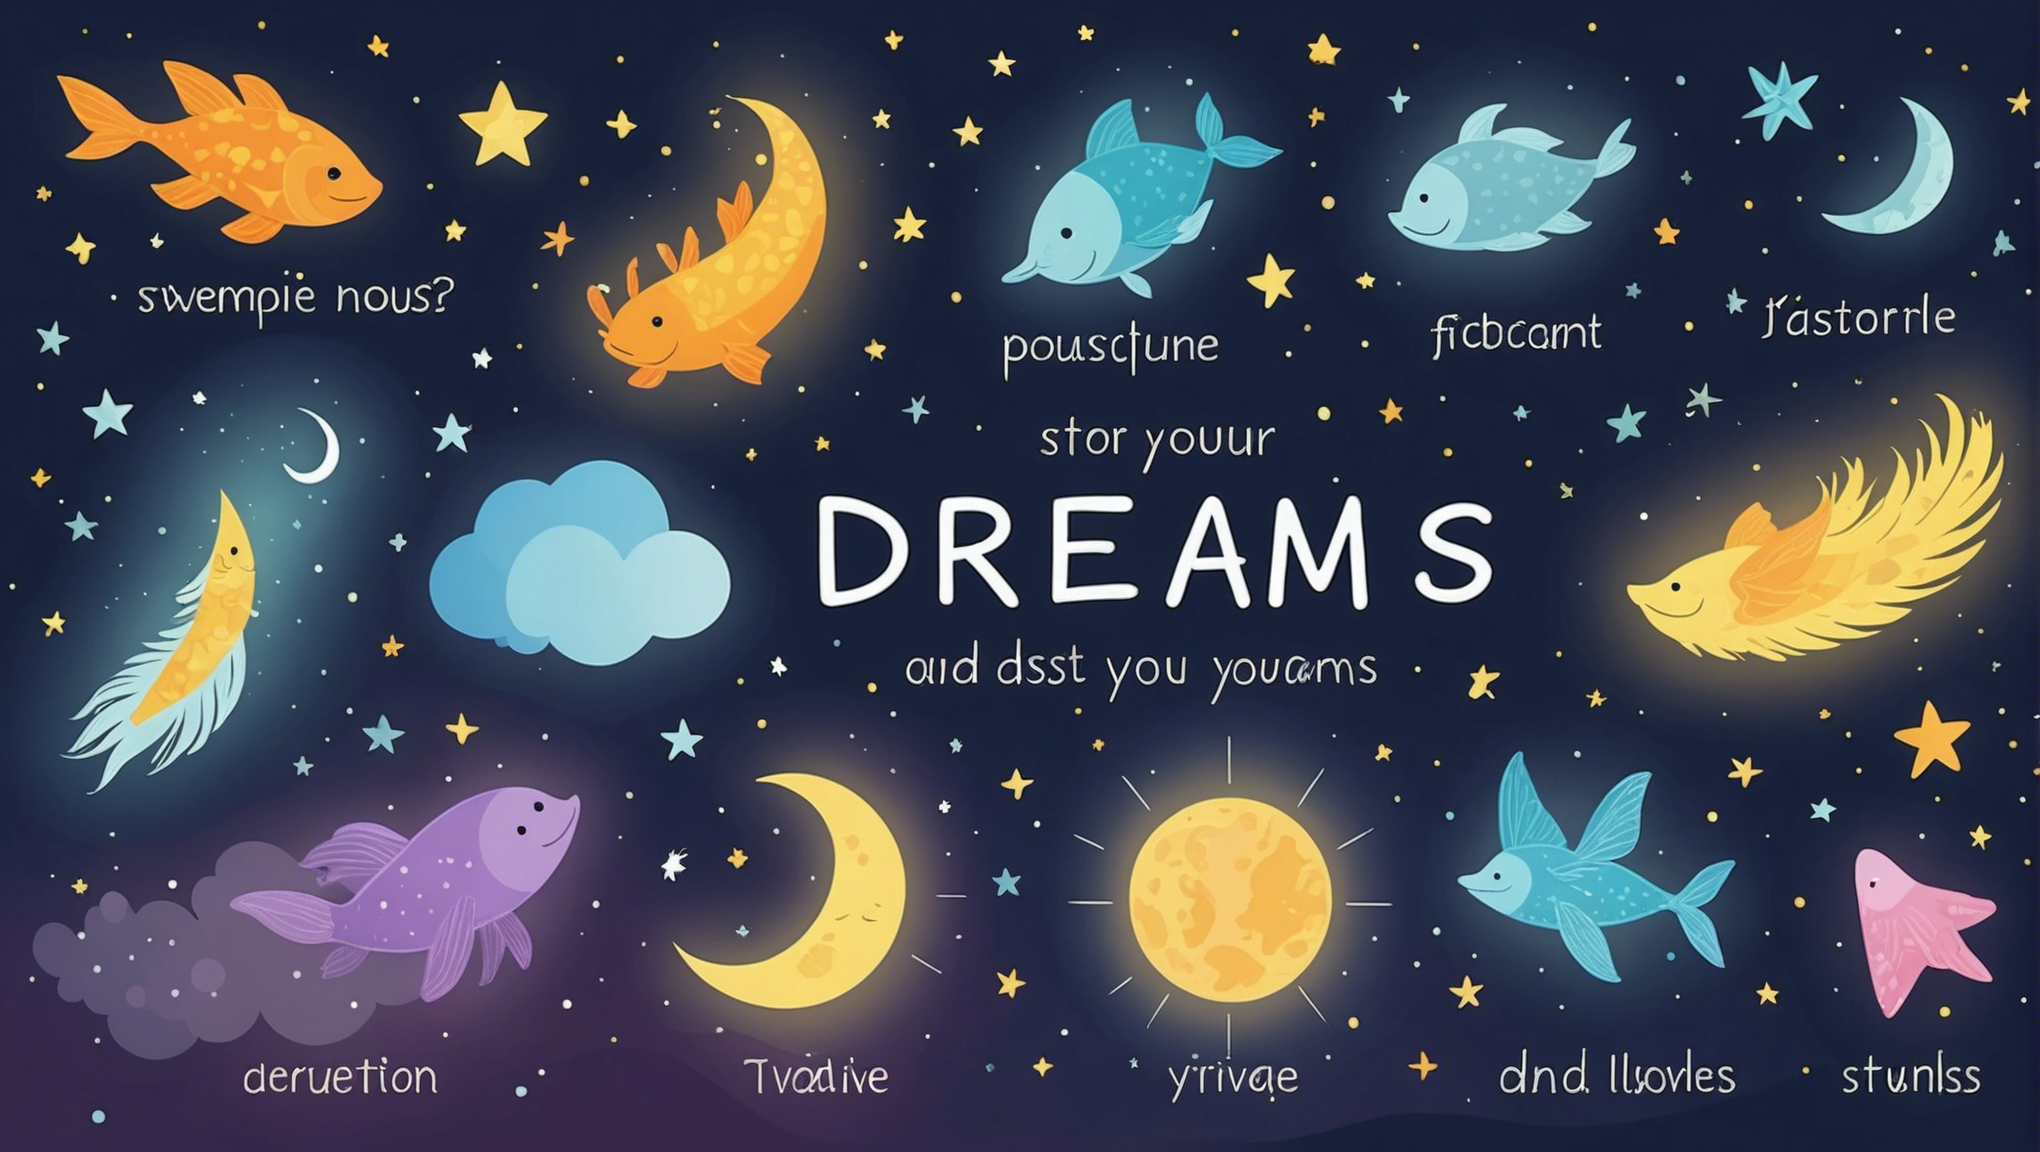 discover the fascinating insights into yourself based on the names in your dreams. uncover the hidden meanings with this illuminating analysis.